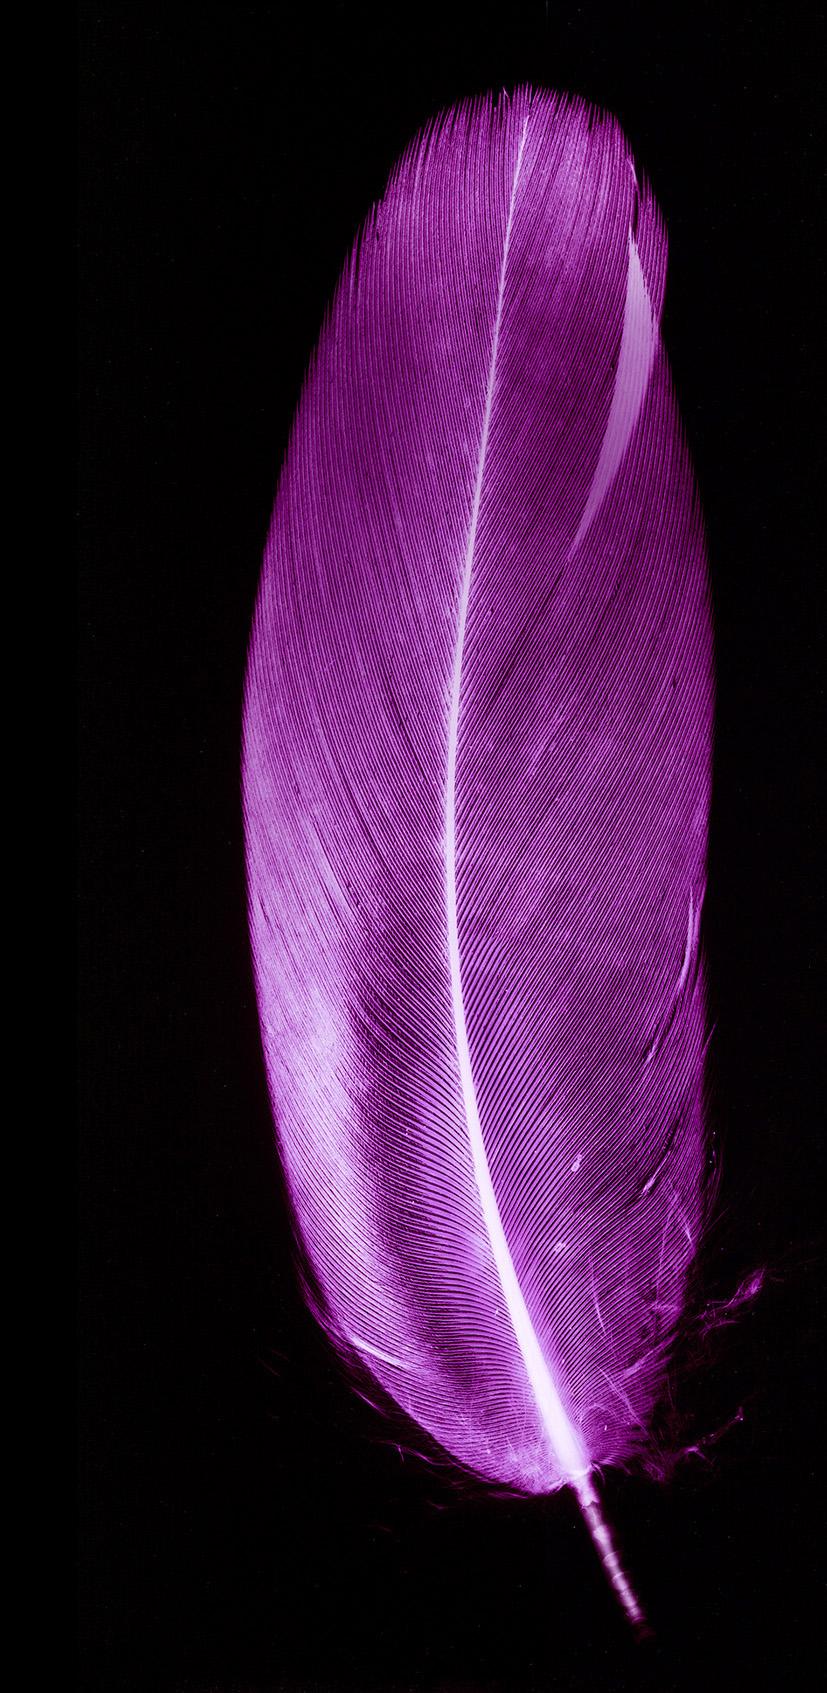 Plum & Ice Blue Pair of Feathers - Conceptual, Color Photography - Black Abstract Photograph by Natasha Heidler